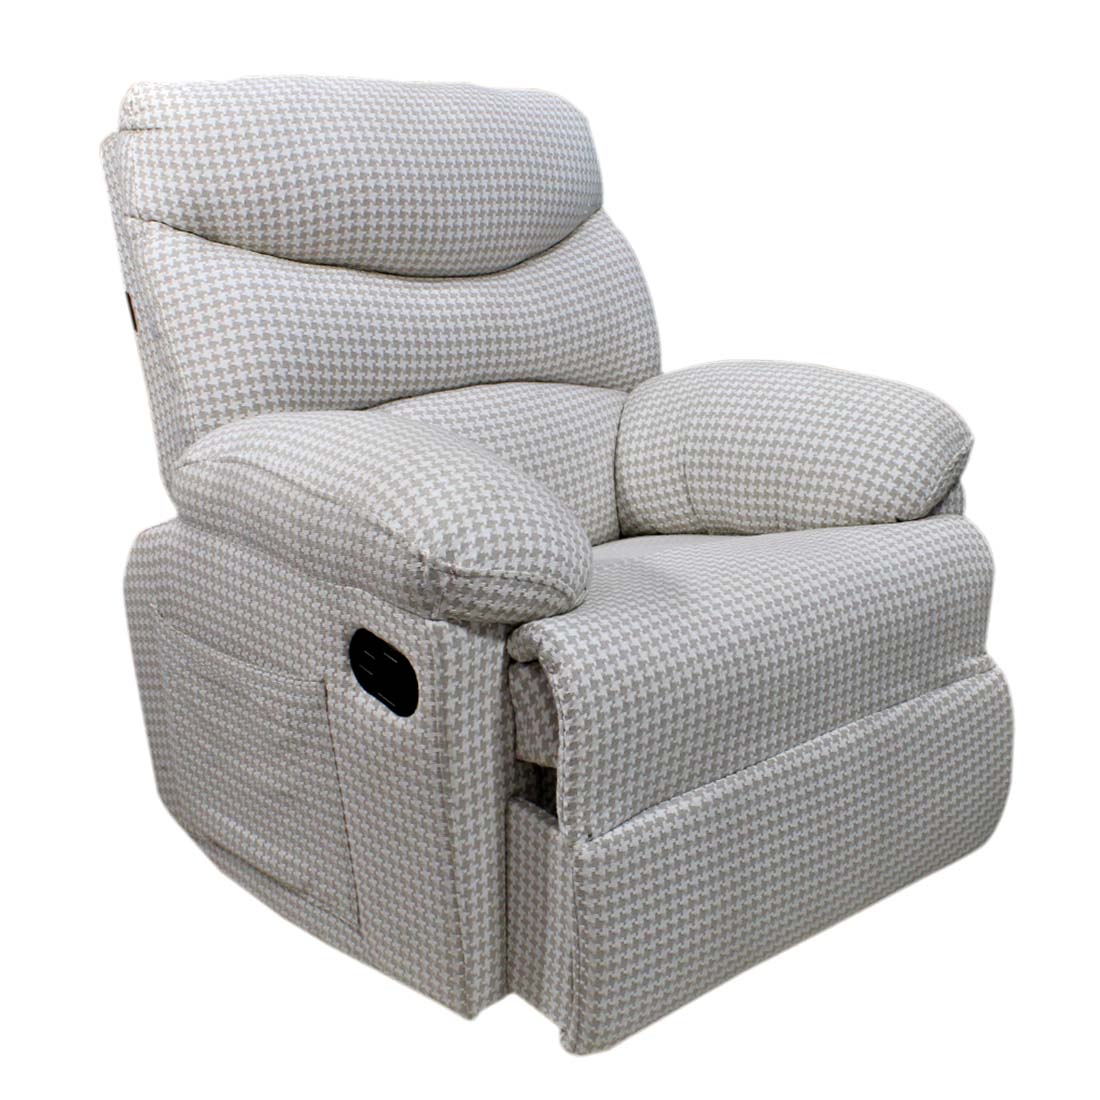 PRIMROSE Houston 3R Rocking And Revolving Recliner With Cotton Fabric - Grey